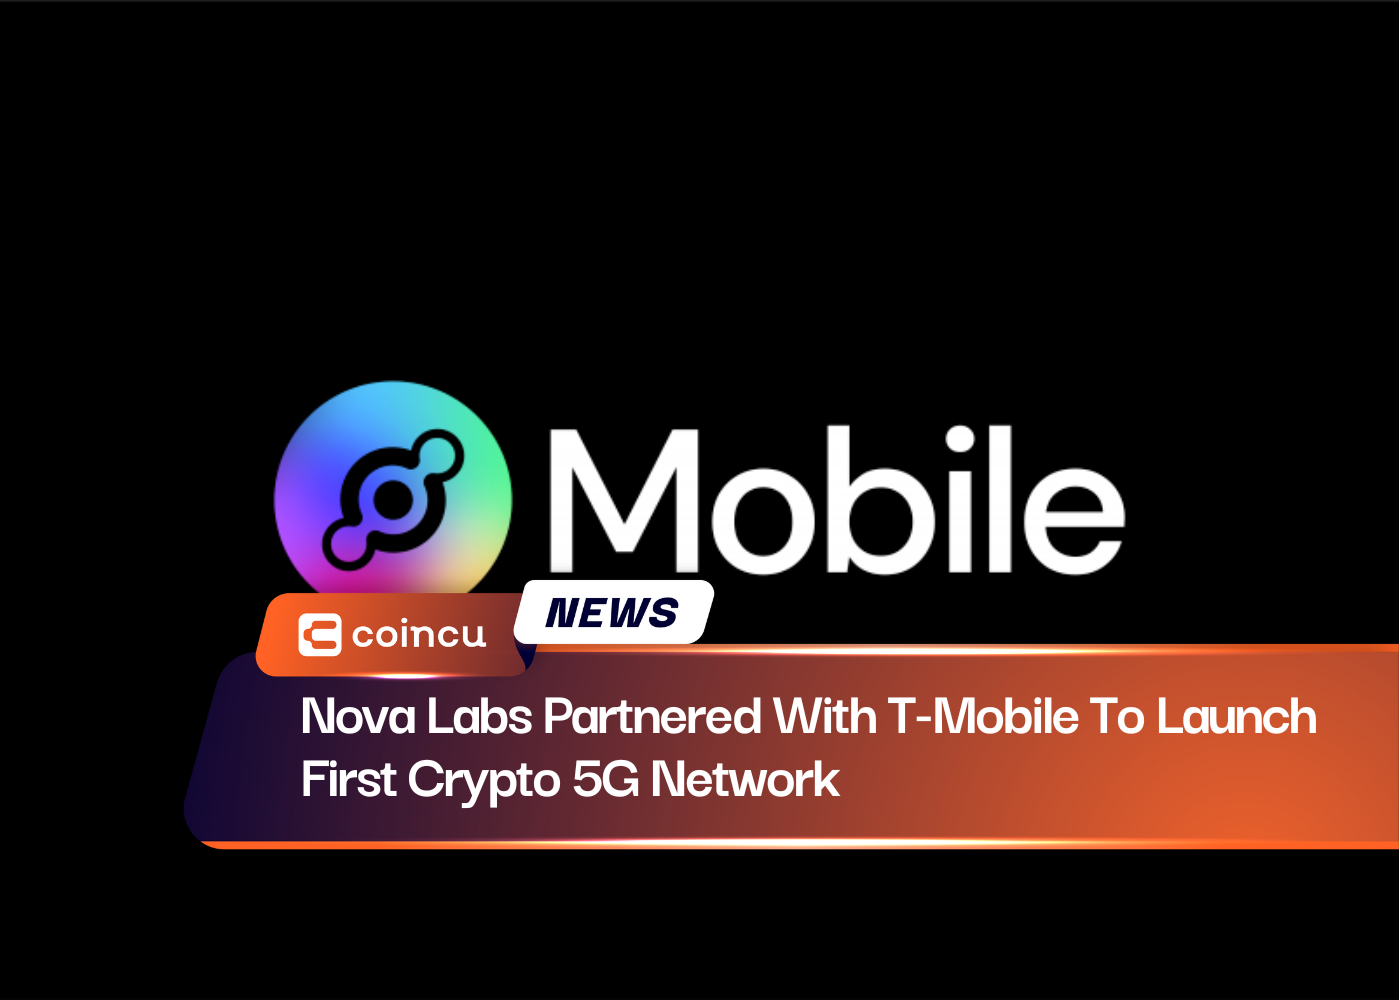 Nova Labs Partnered With T-Mobile To Launch First Crypto 5G Network